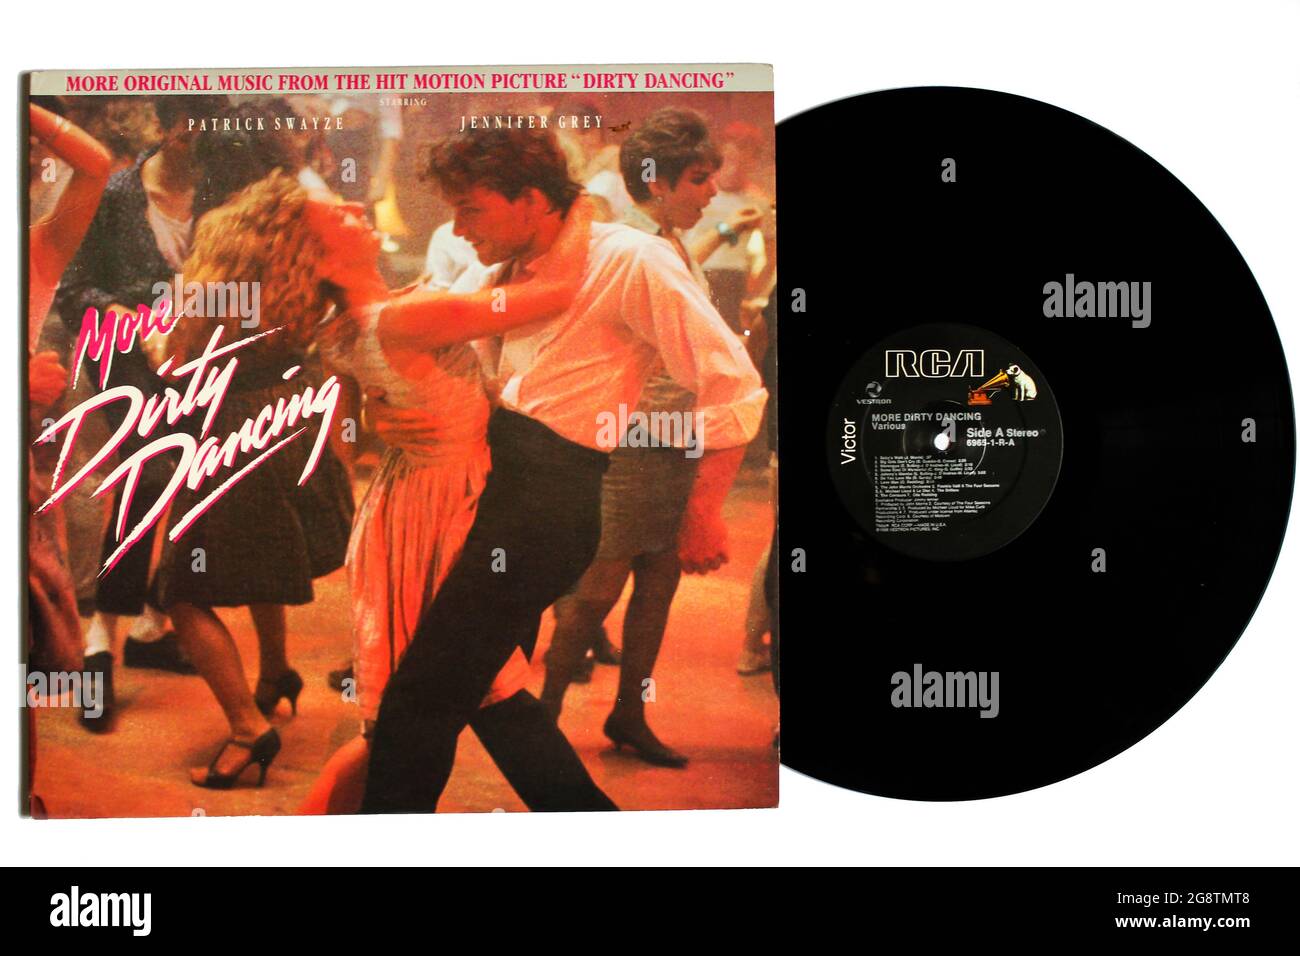 More Dirty Dancing: Original Soundtrack from the Vestron Motion Picture. Music album on vinyl record LP disc. Album cover Stock Photo